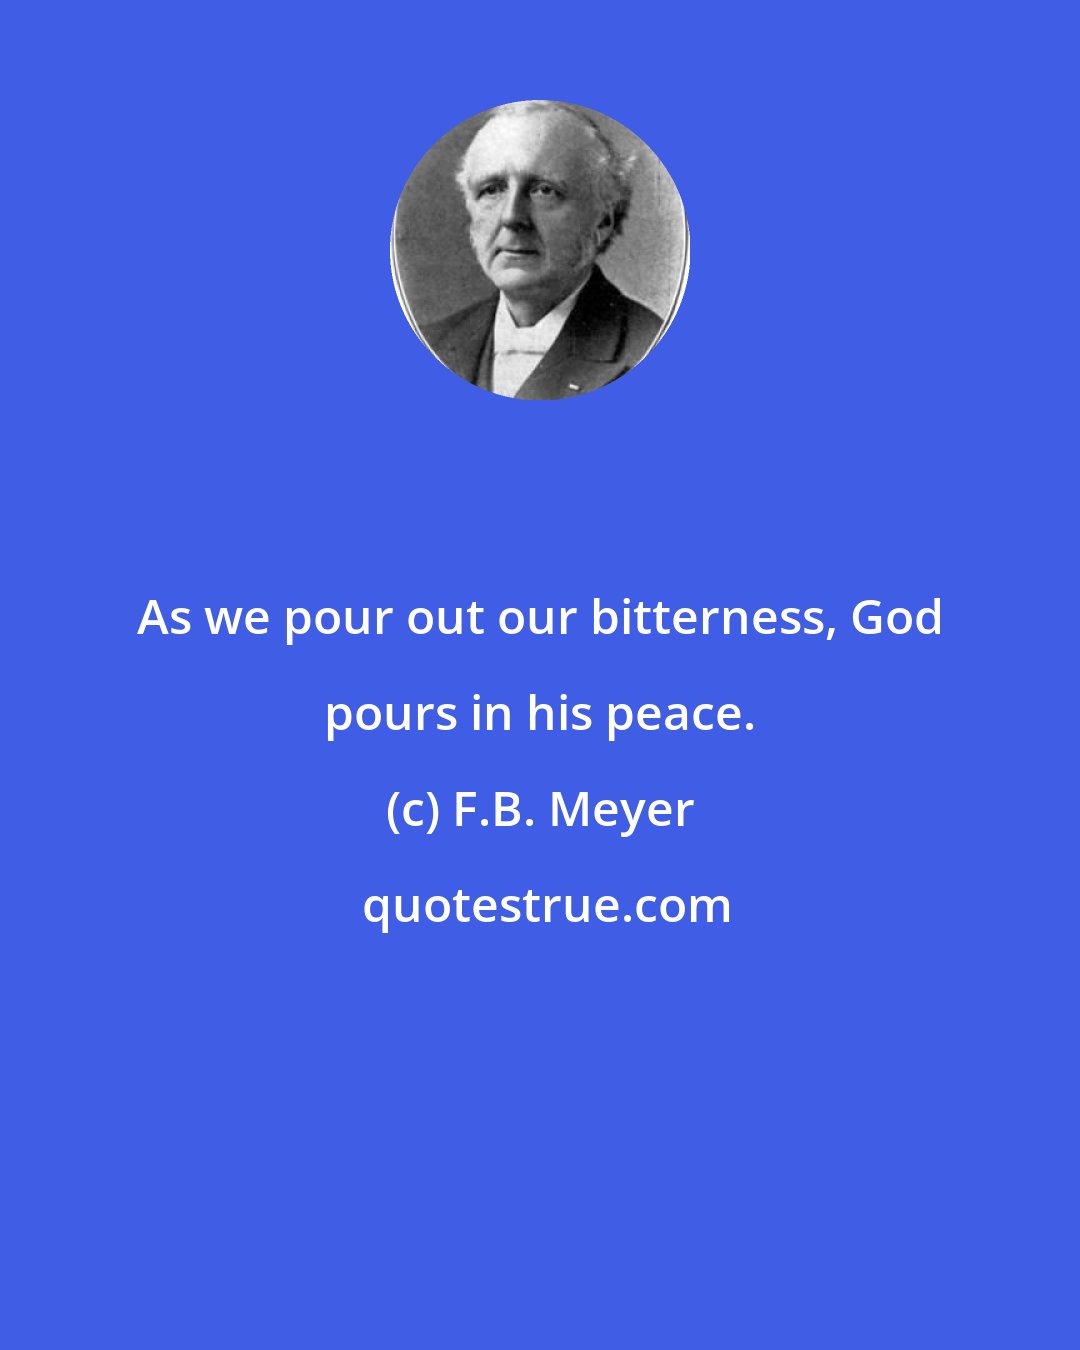 F.B. Meyer: As we pour out our bitterness, God pours in his peace.